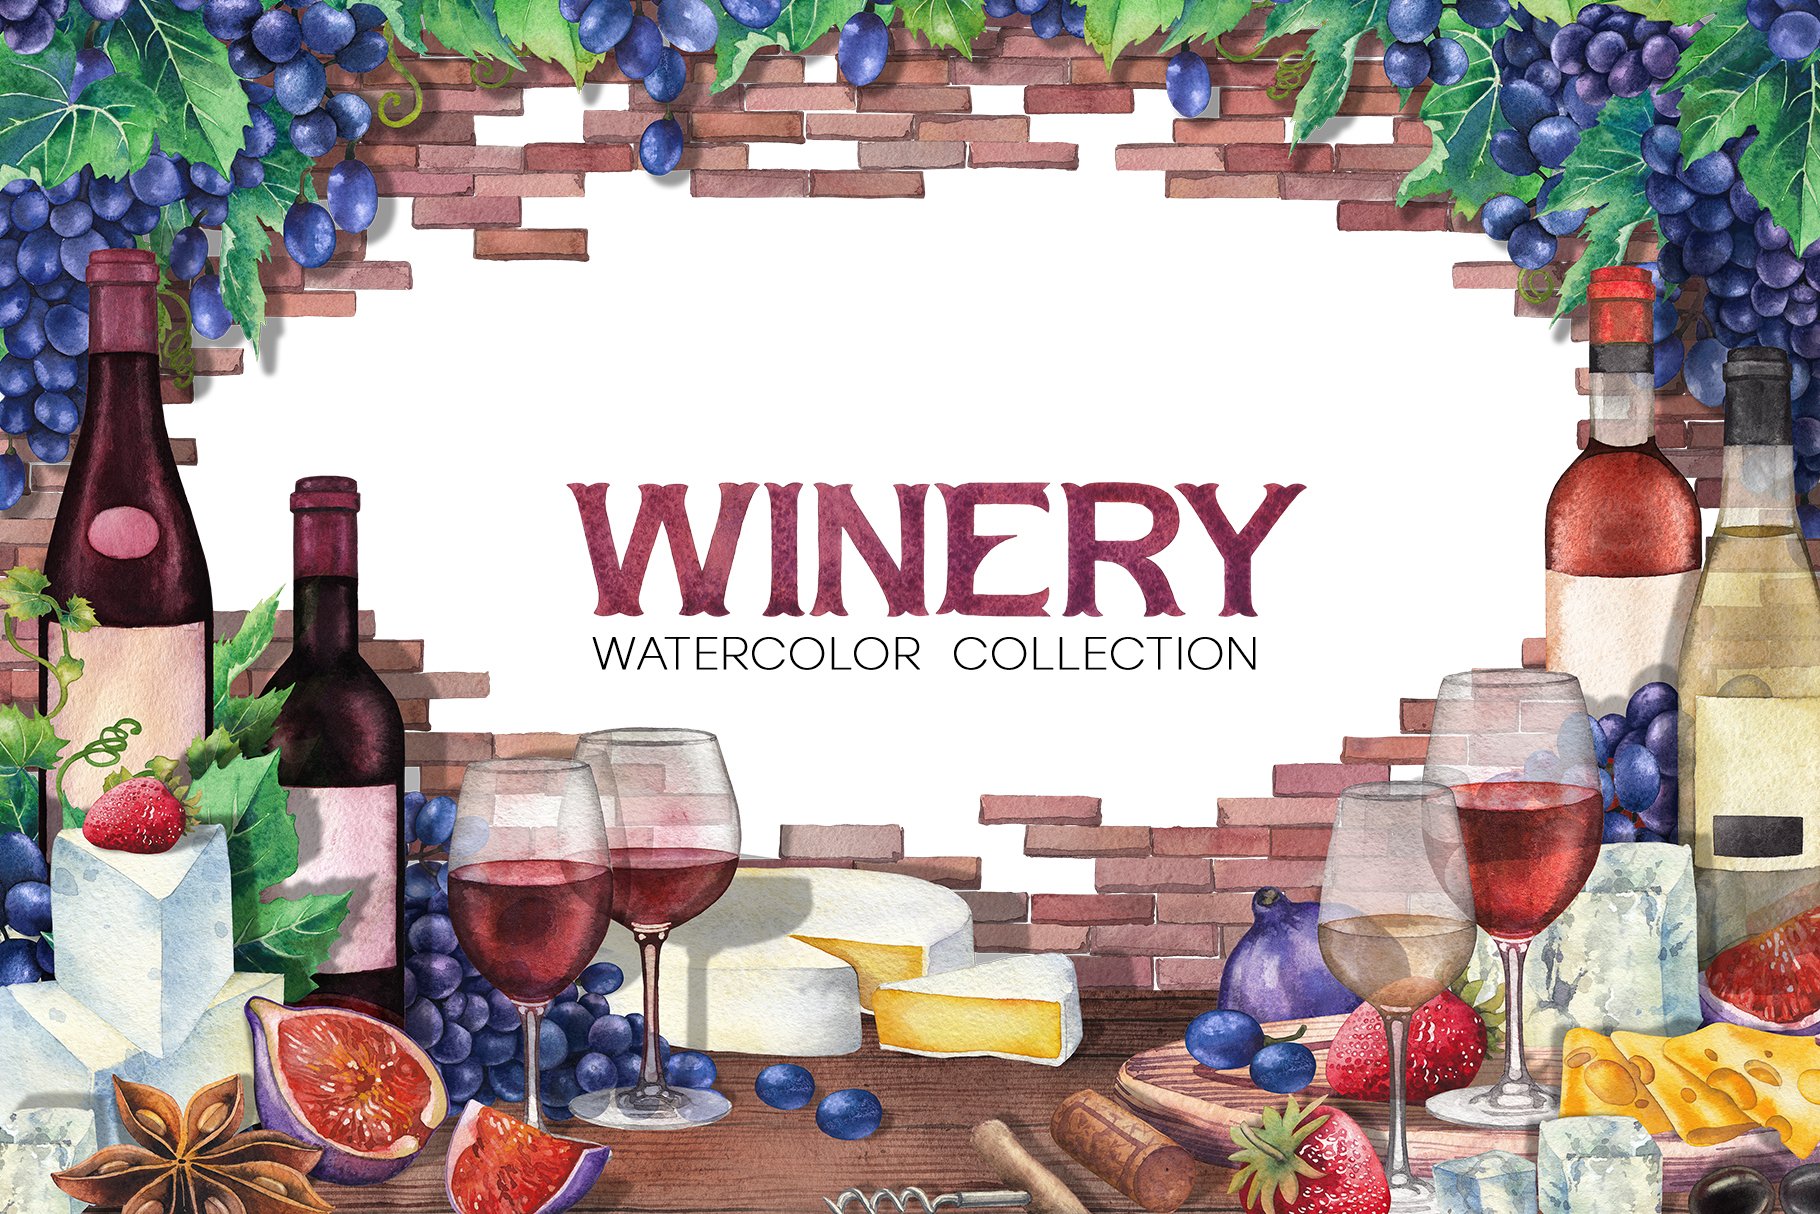 Watercolor Wine collection cover image.